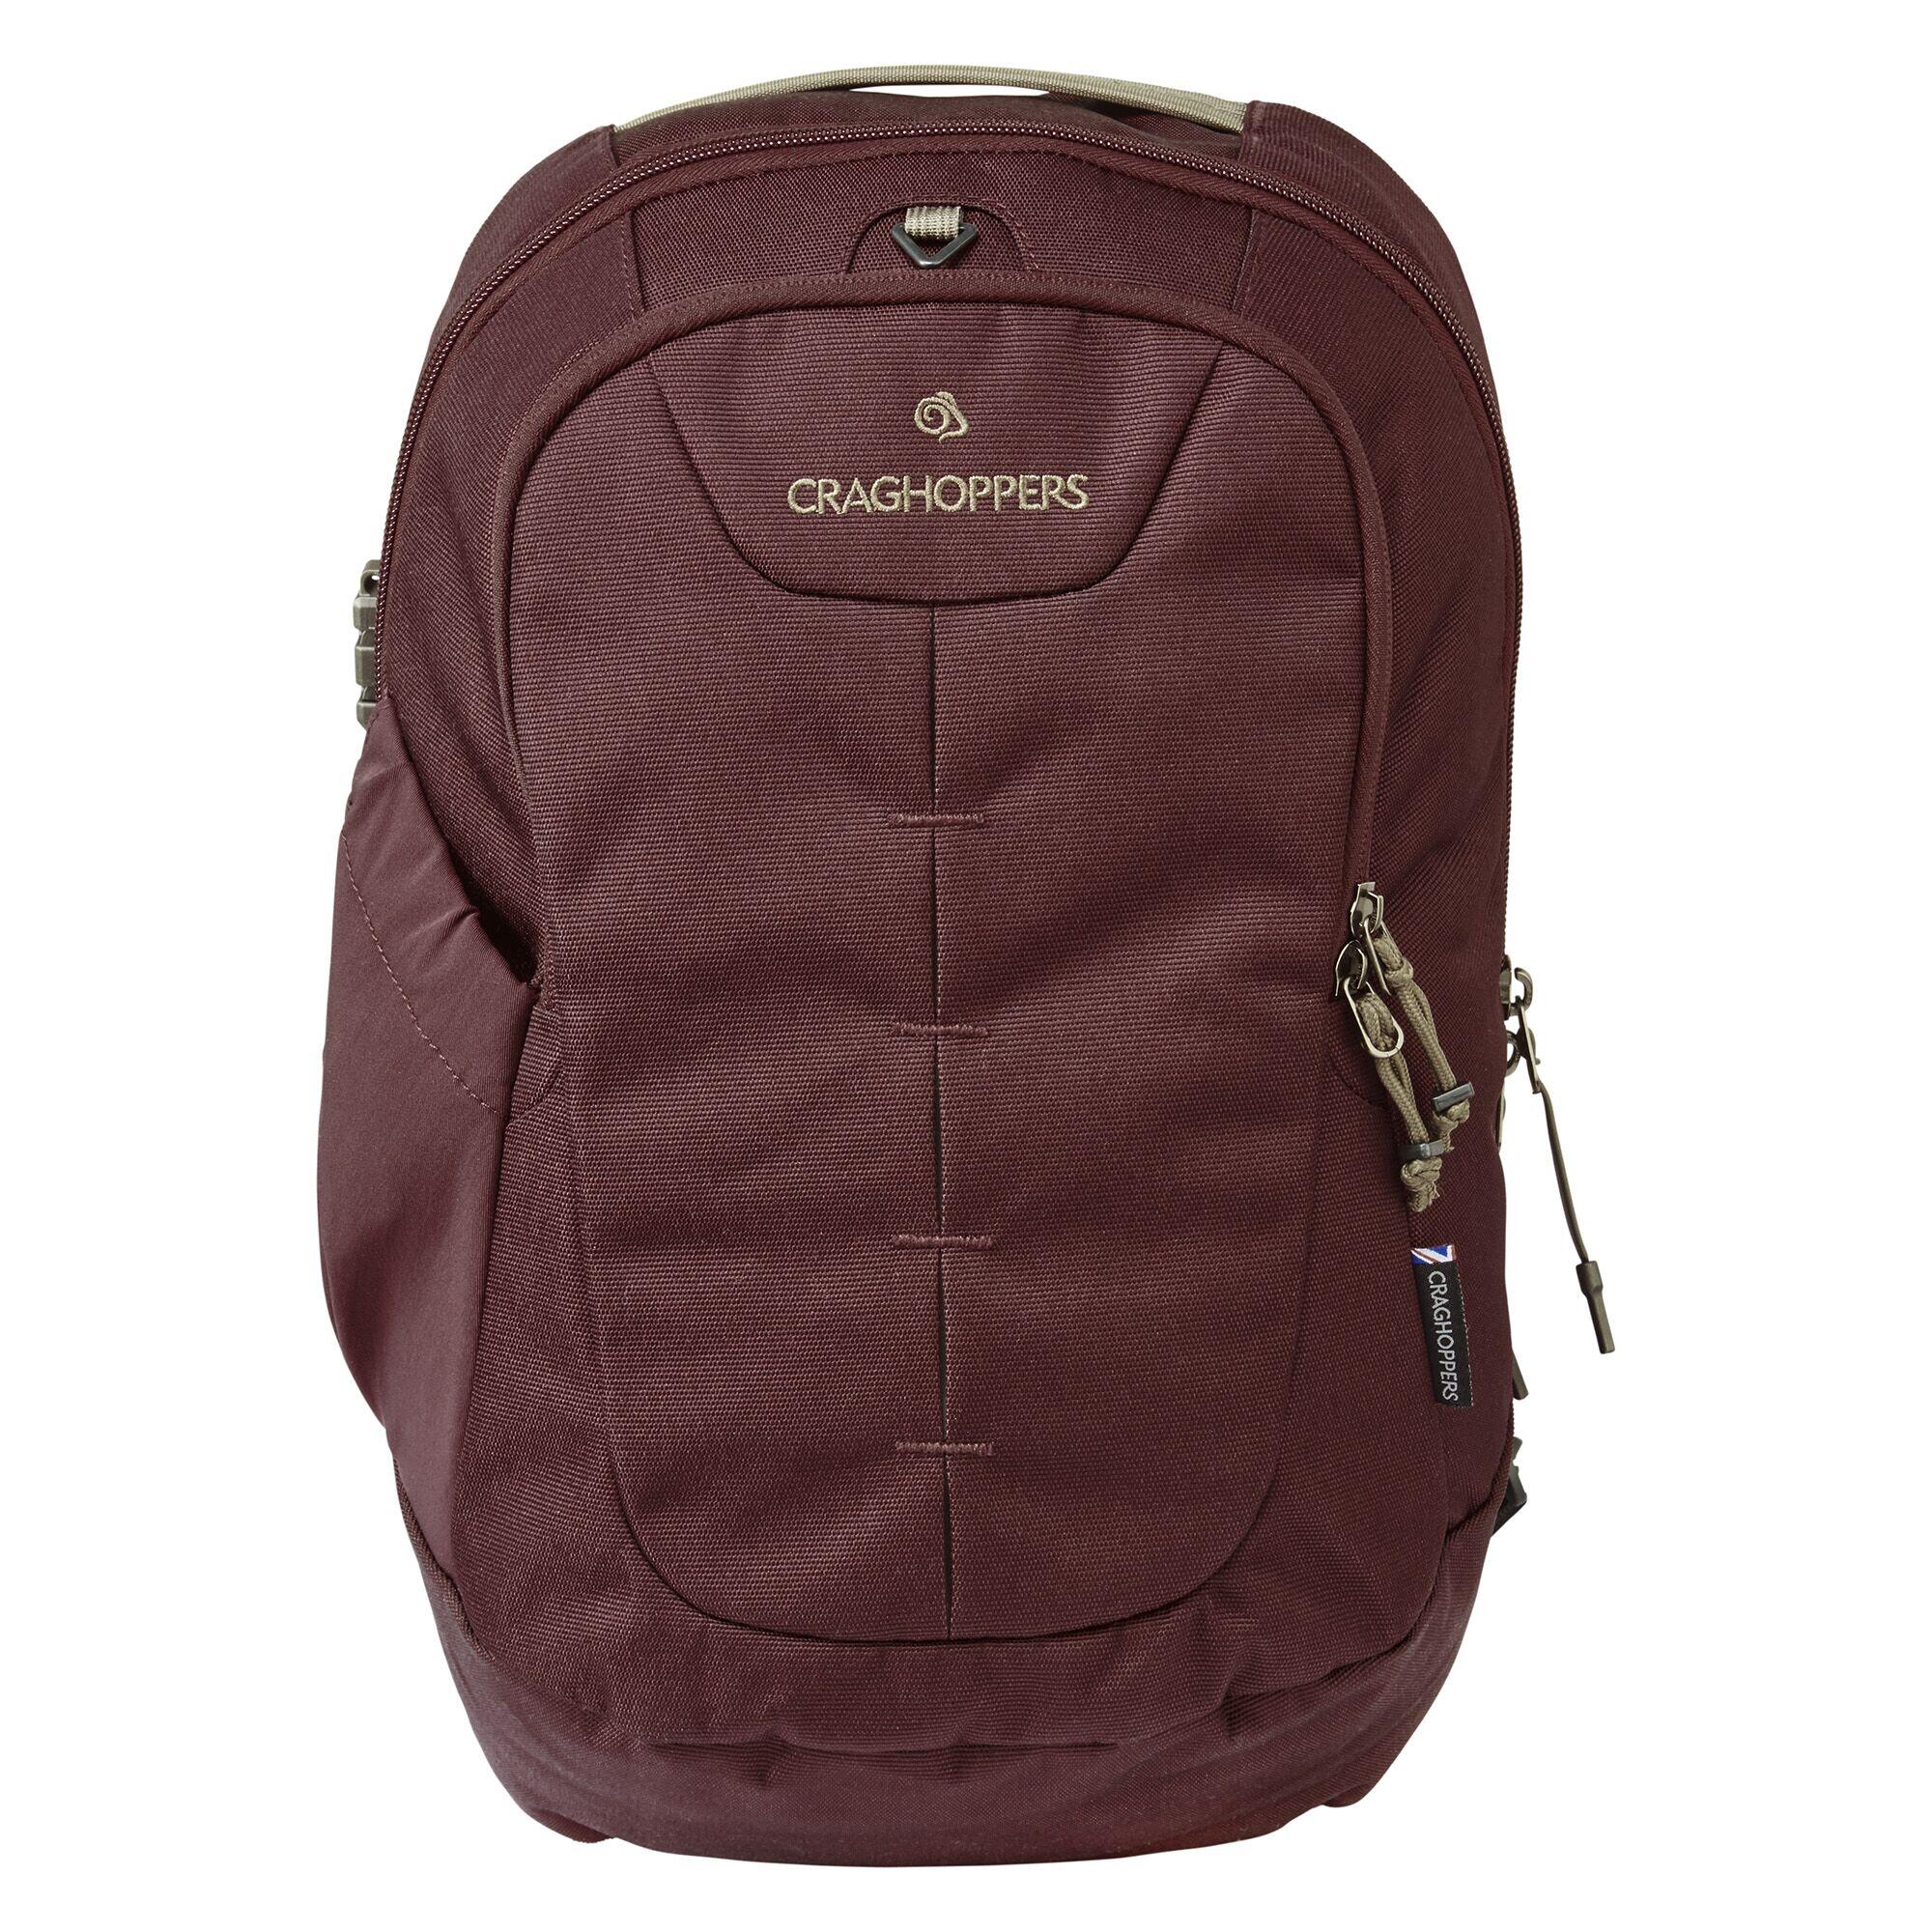 CRAGHOPPERS 18L Anti-Theft Backpack